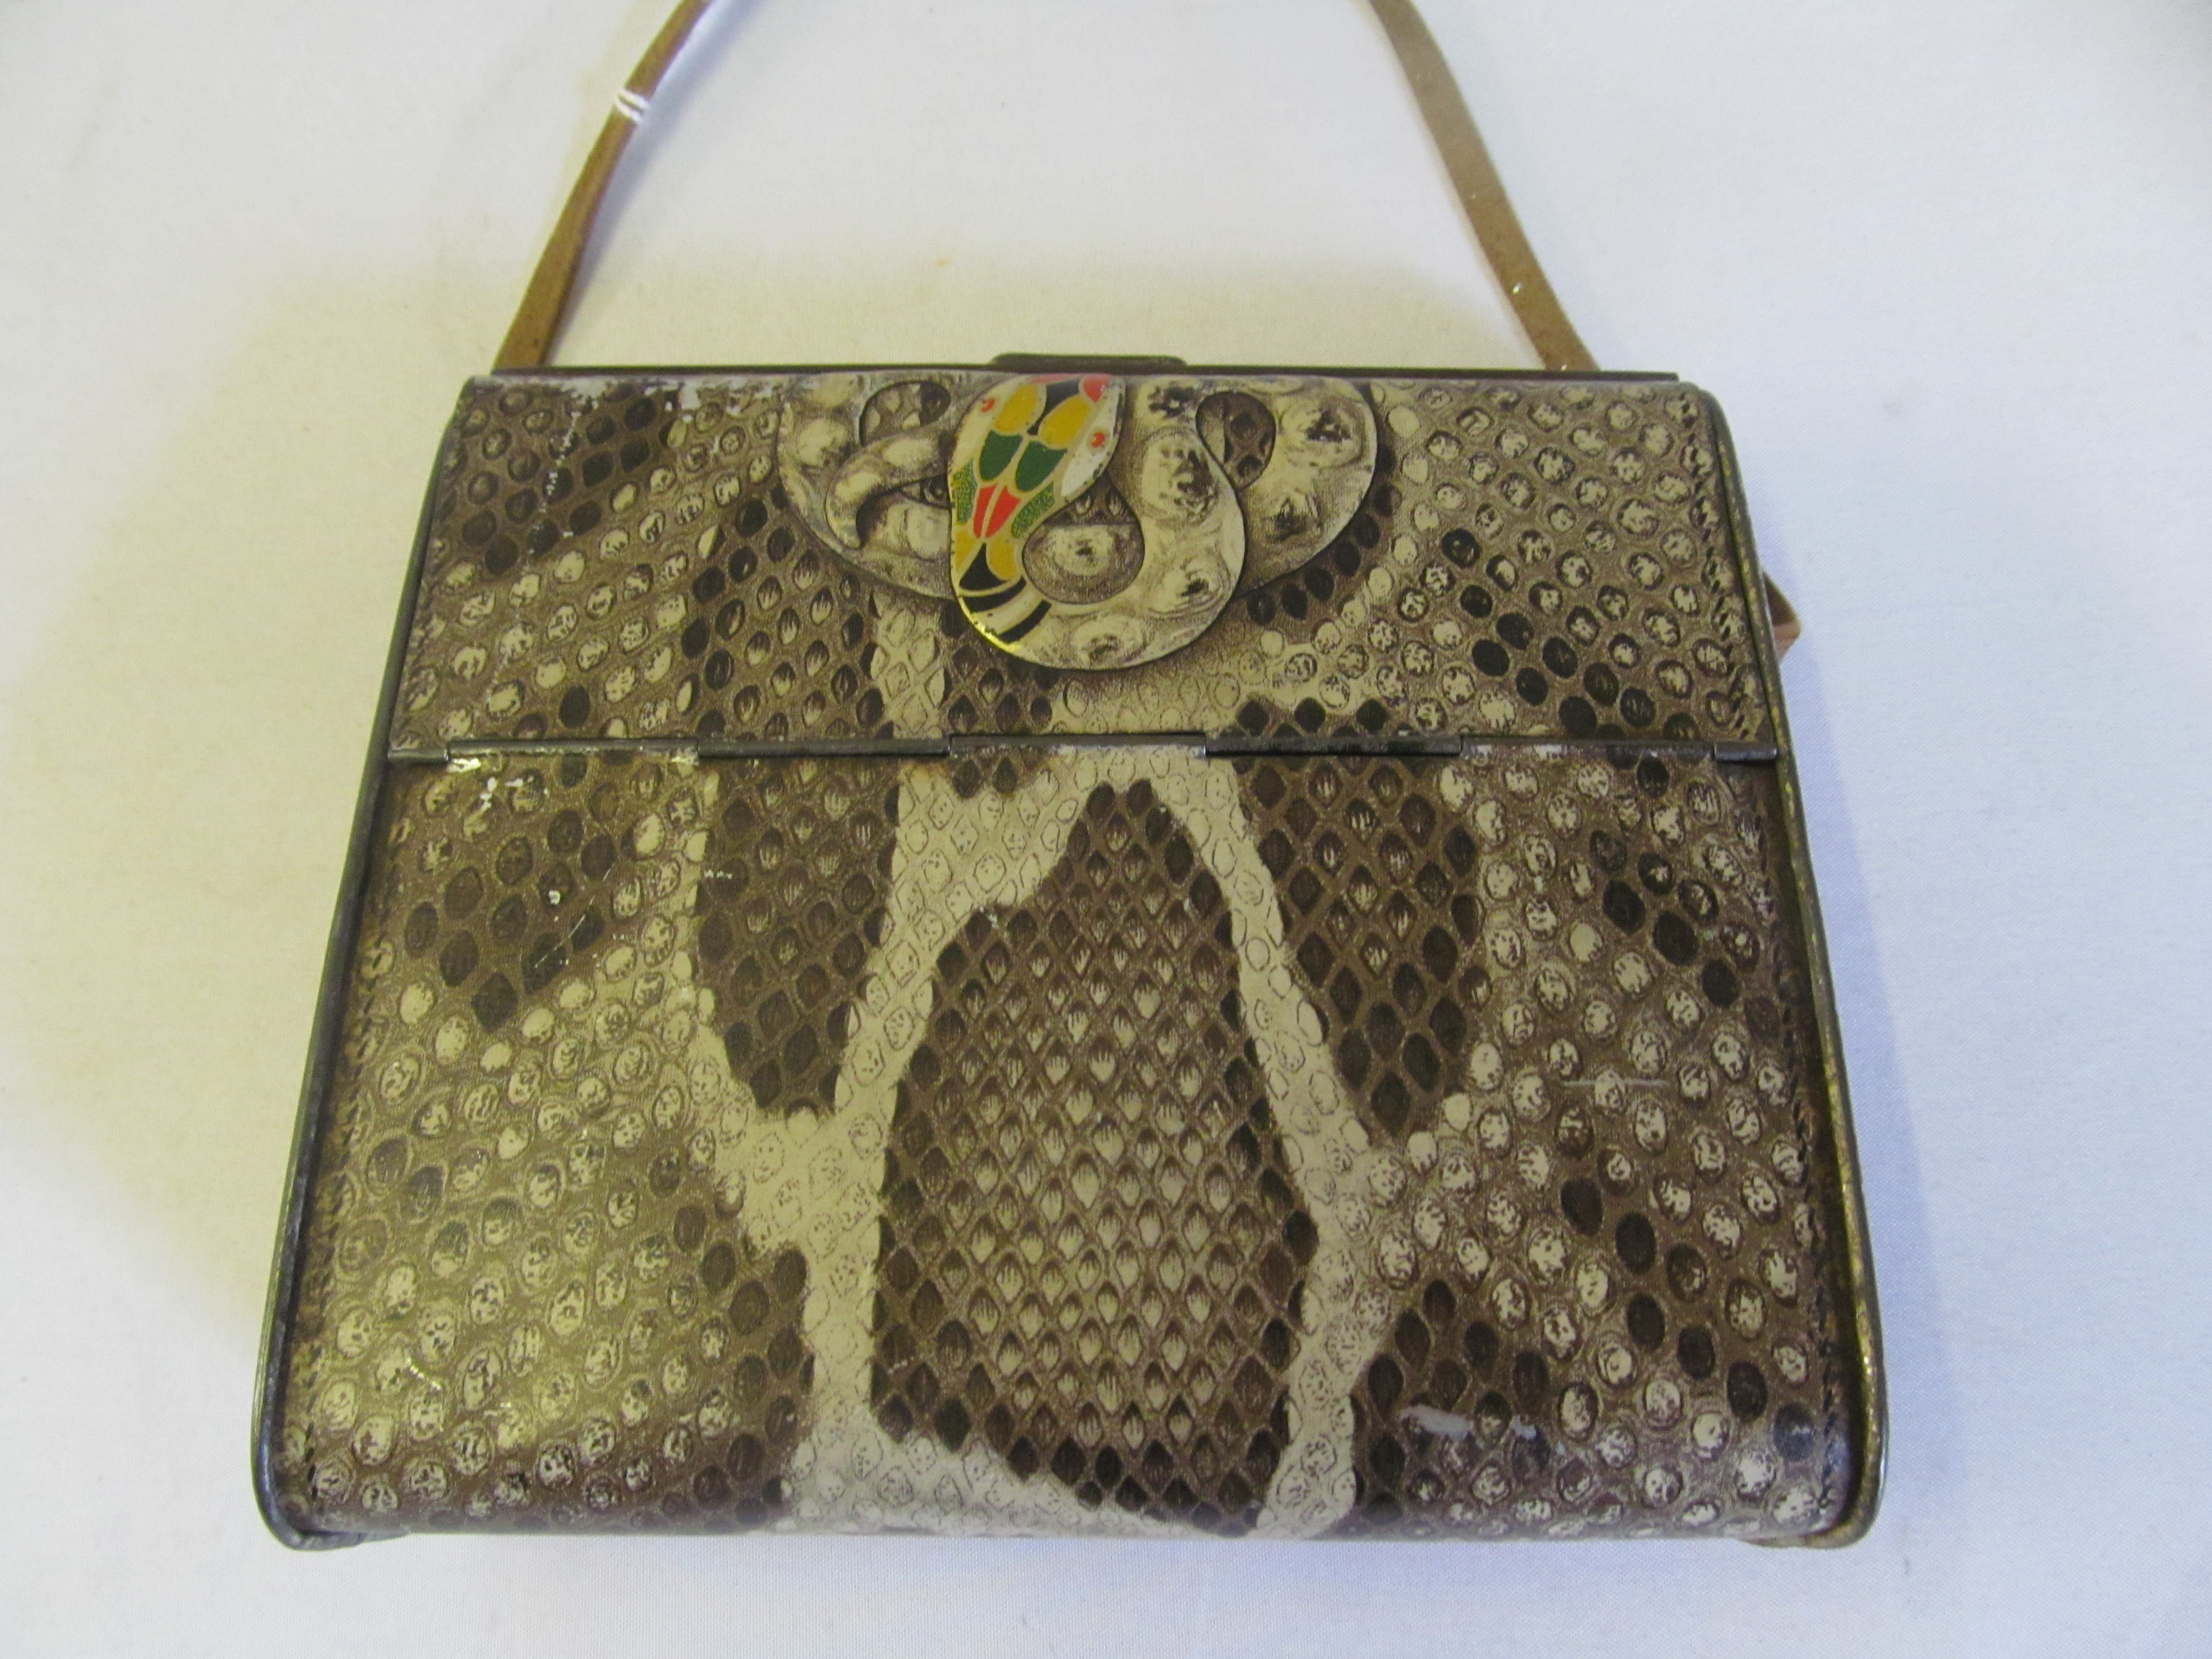 A novelty Huntley & Palmers biscuit tin in the form of a snakeskin handbag